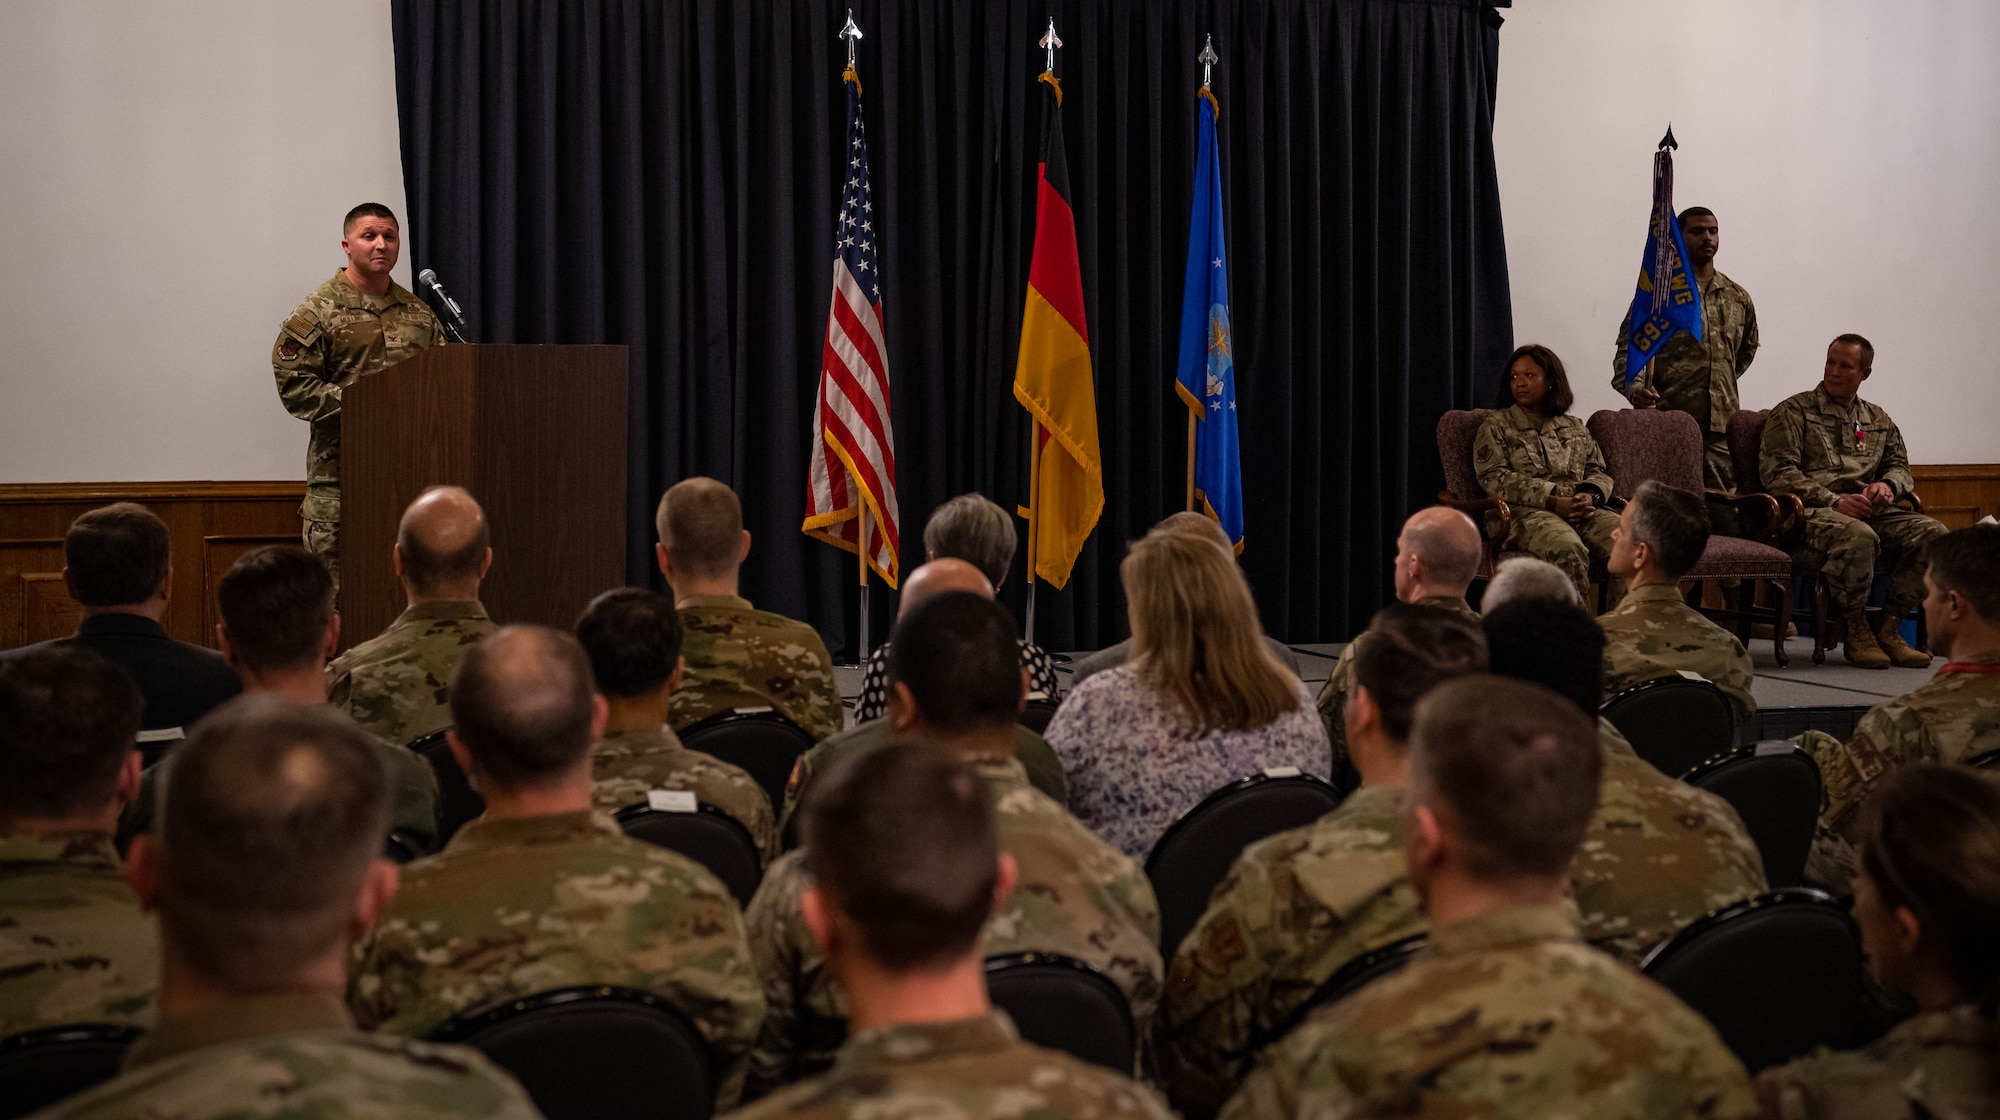 US Air Force Col Creighton Mullins, 693rd Intelligence, Surveillance and Reconnaissance Group commander, addresses Airmen just after assuming command of the group at Ramstein Air Base, Germany, May 6, 2022. The 693rd ISRG and its 3 subordinate squadrons conduct a variety of multi-intelligence operations, providing information to three combatant commands, combat forces and national leadership.